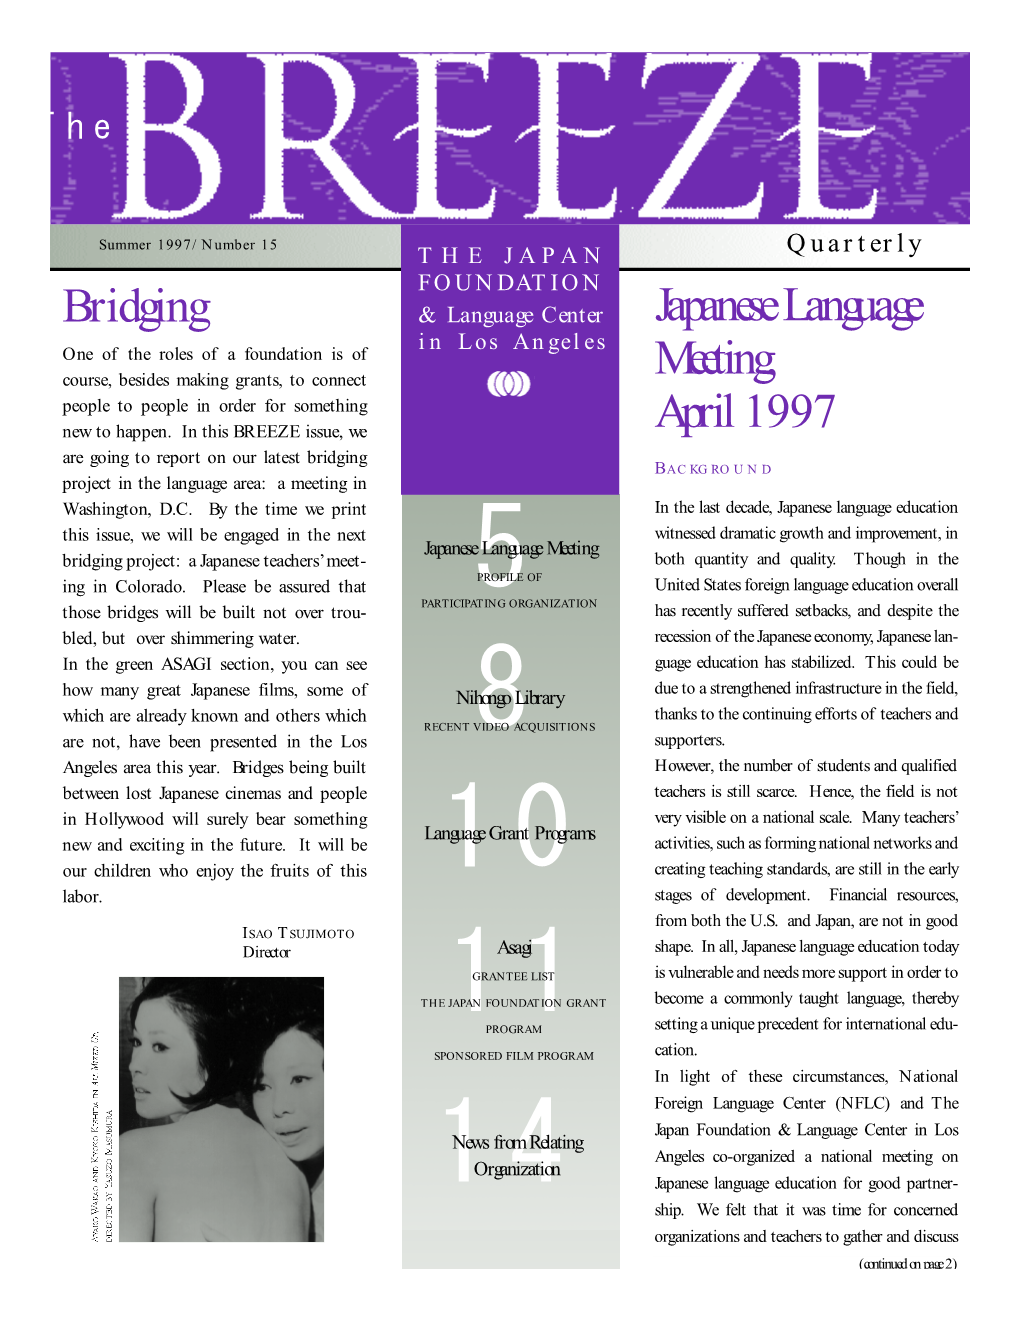 BREEZE Issue, We April 1997 a Re Going to Rep O Rt on Our Latest Bridging B a C KG RO U N D P Roject in the Language Area: a Meeting in Washington, D.C